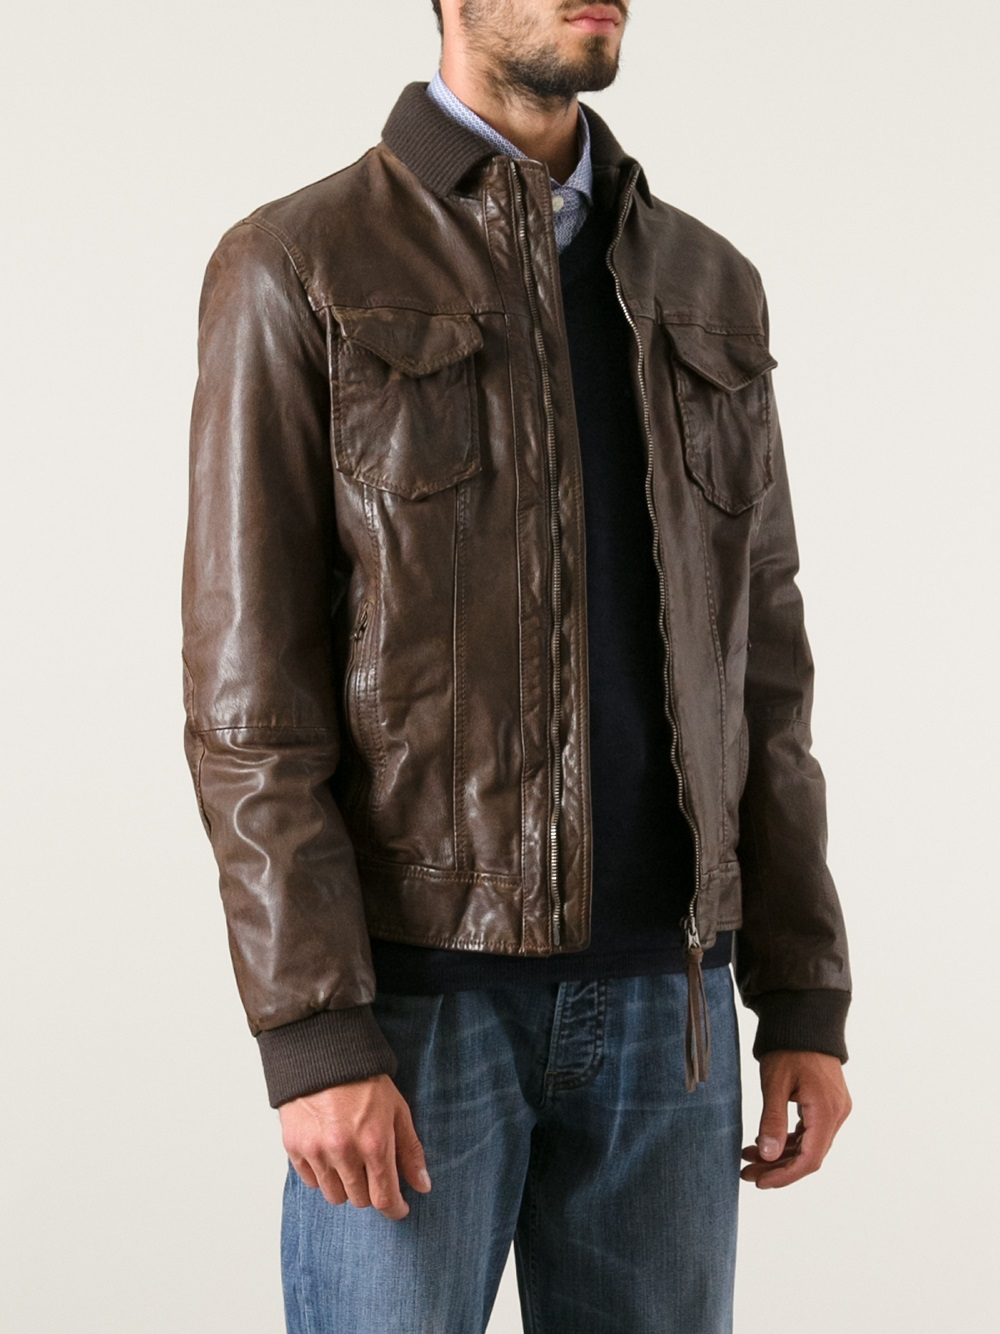 Armani Jeans Leather Jacket in Brown for Men - Lyst